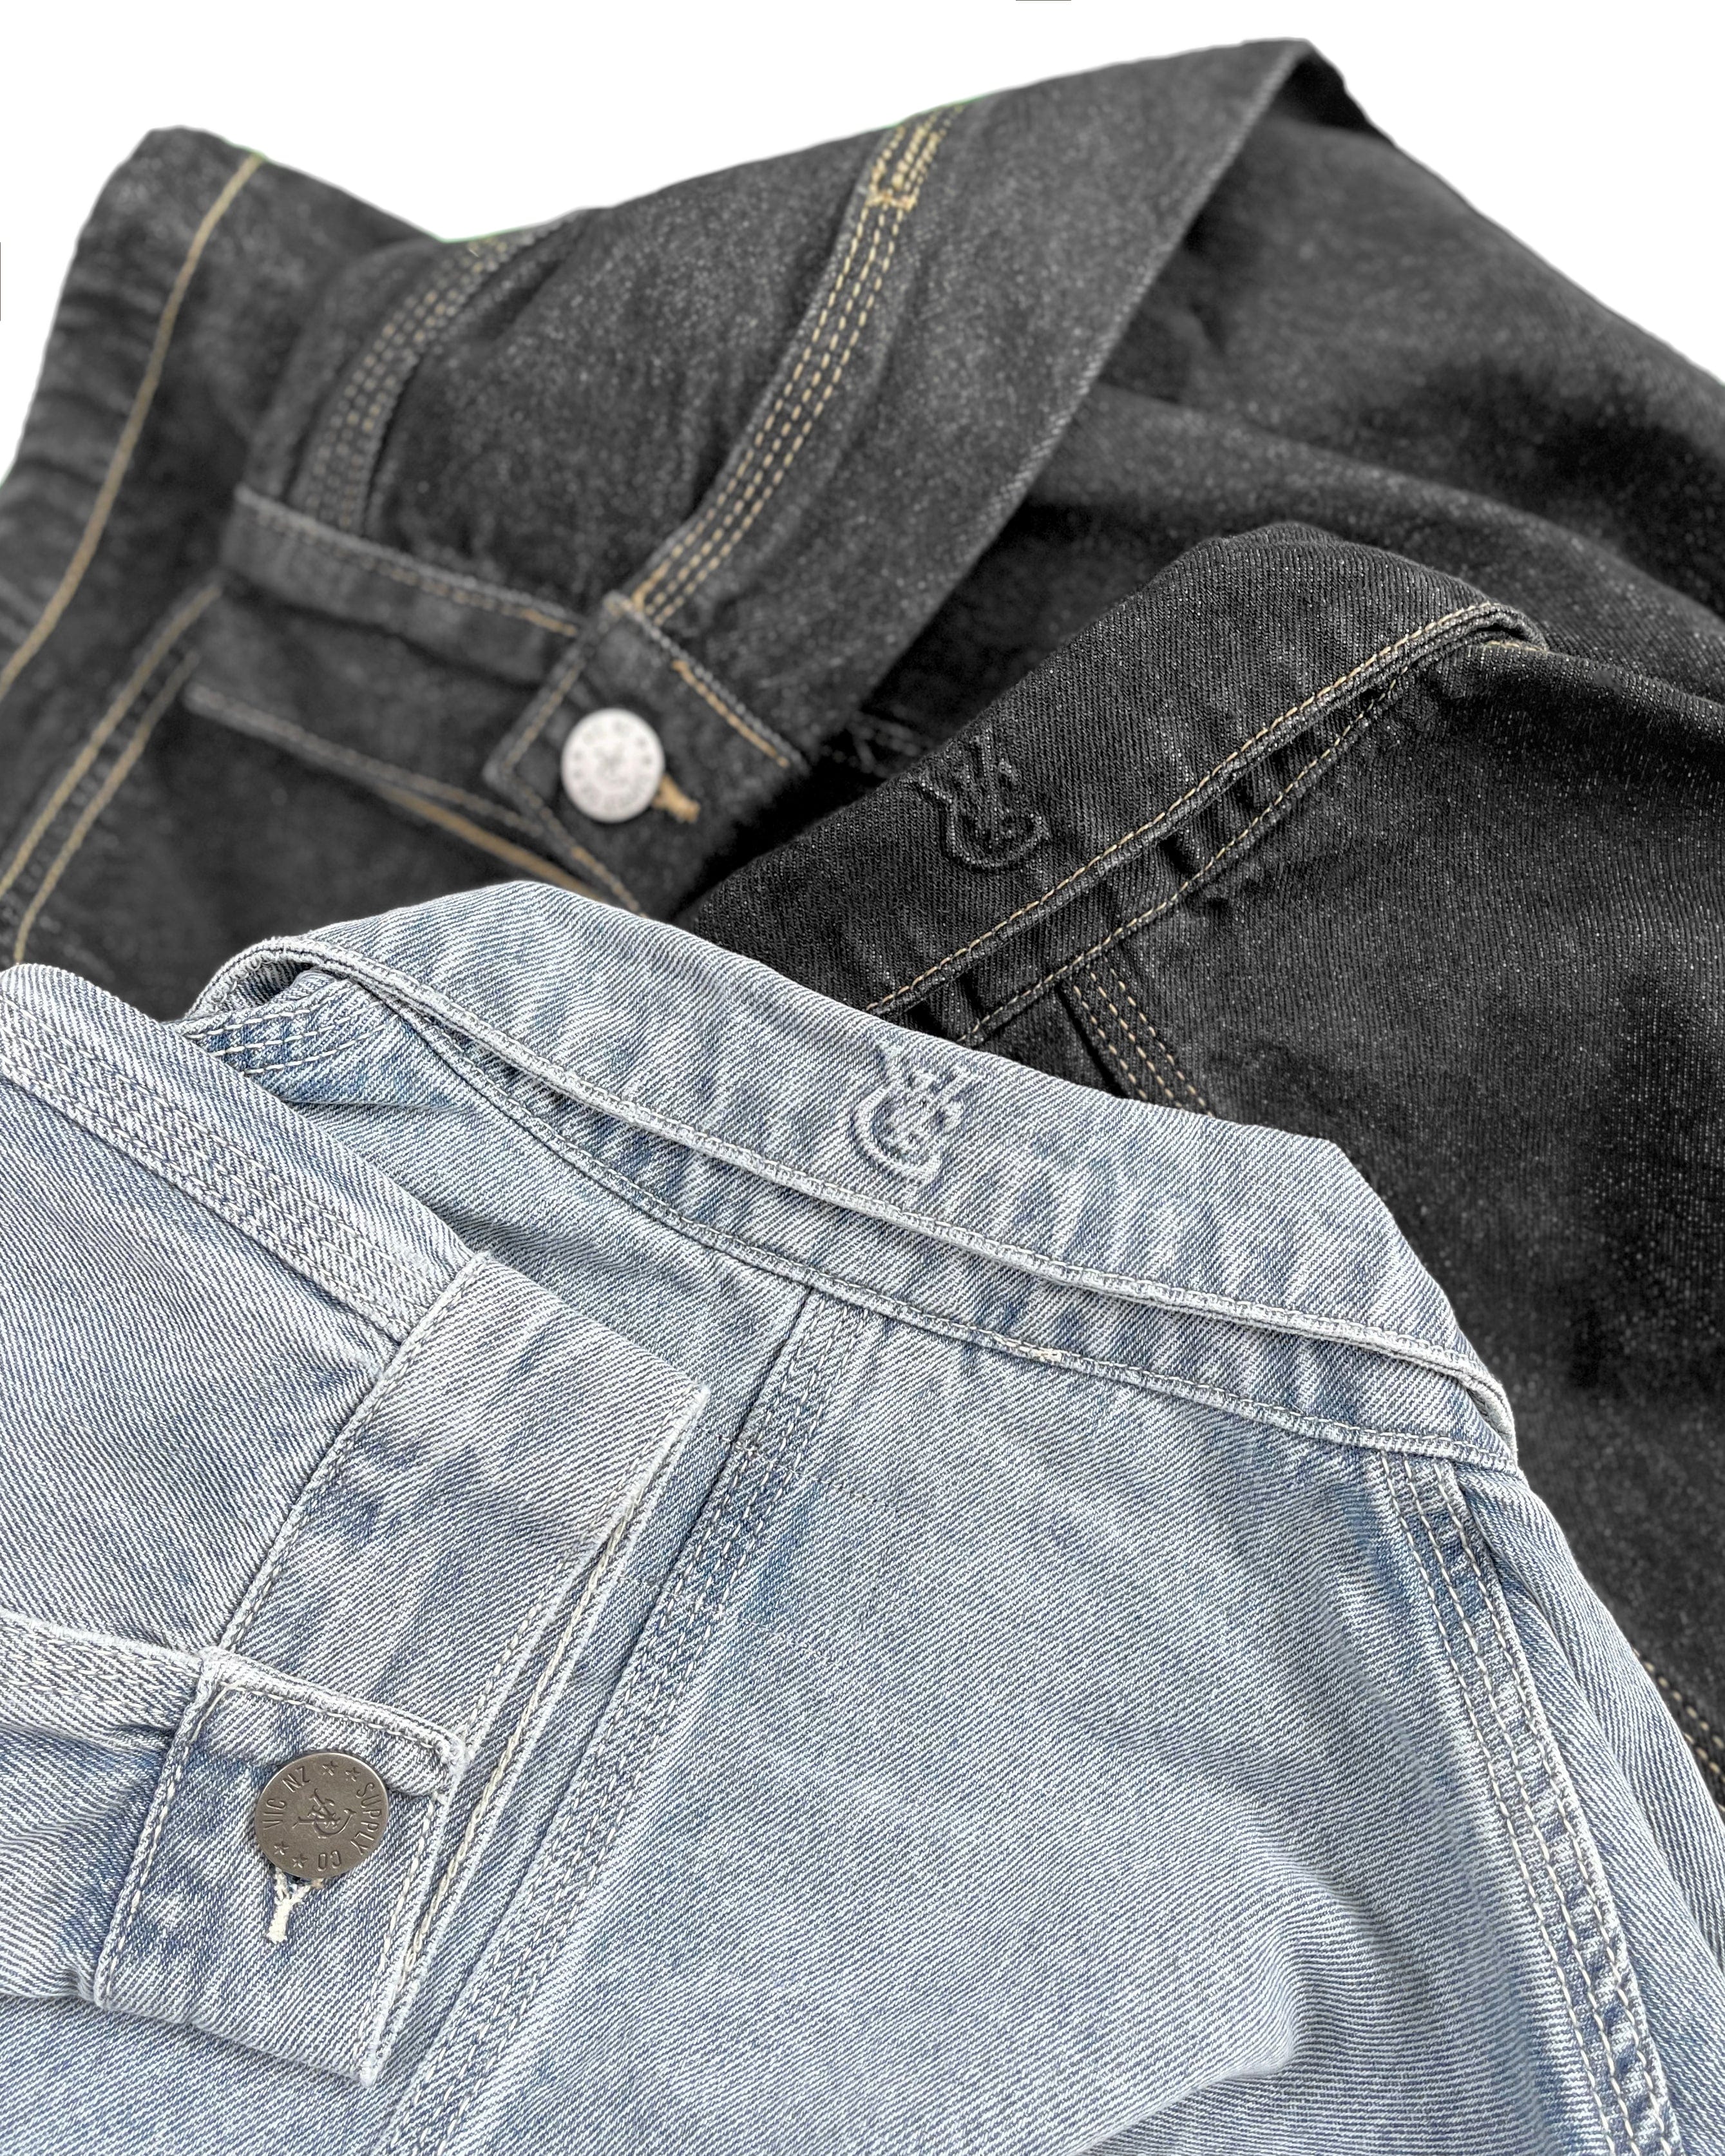 Denim chore jacket coat. Relaxed fit 11.25oz Denim Fabric Dropped shoulders Four front pockets Contrast stitching Branded shank buttons VIC pip label at chest pocket Embossed logo at the back collar.